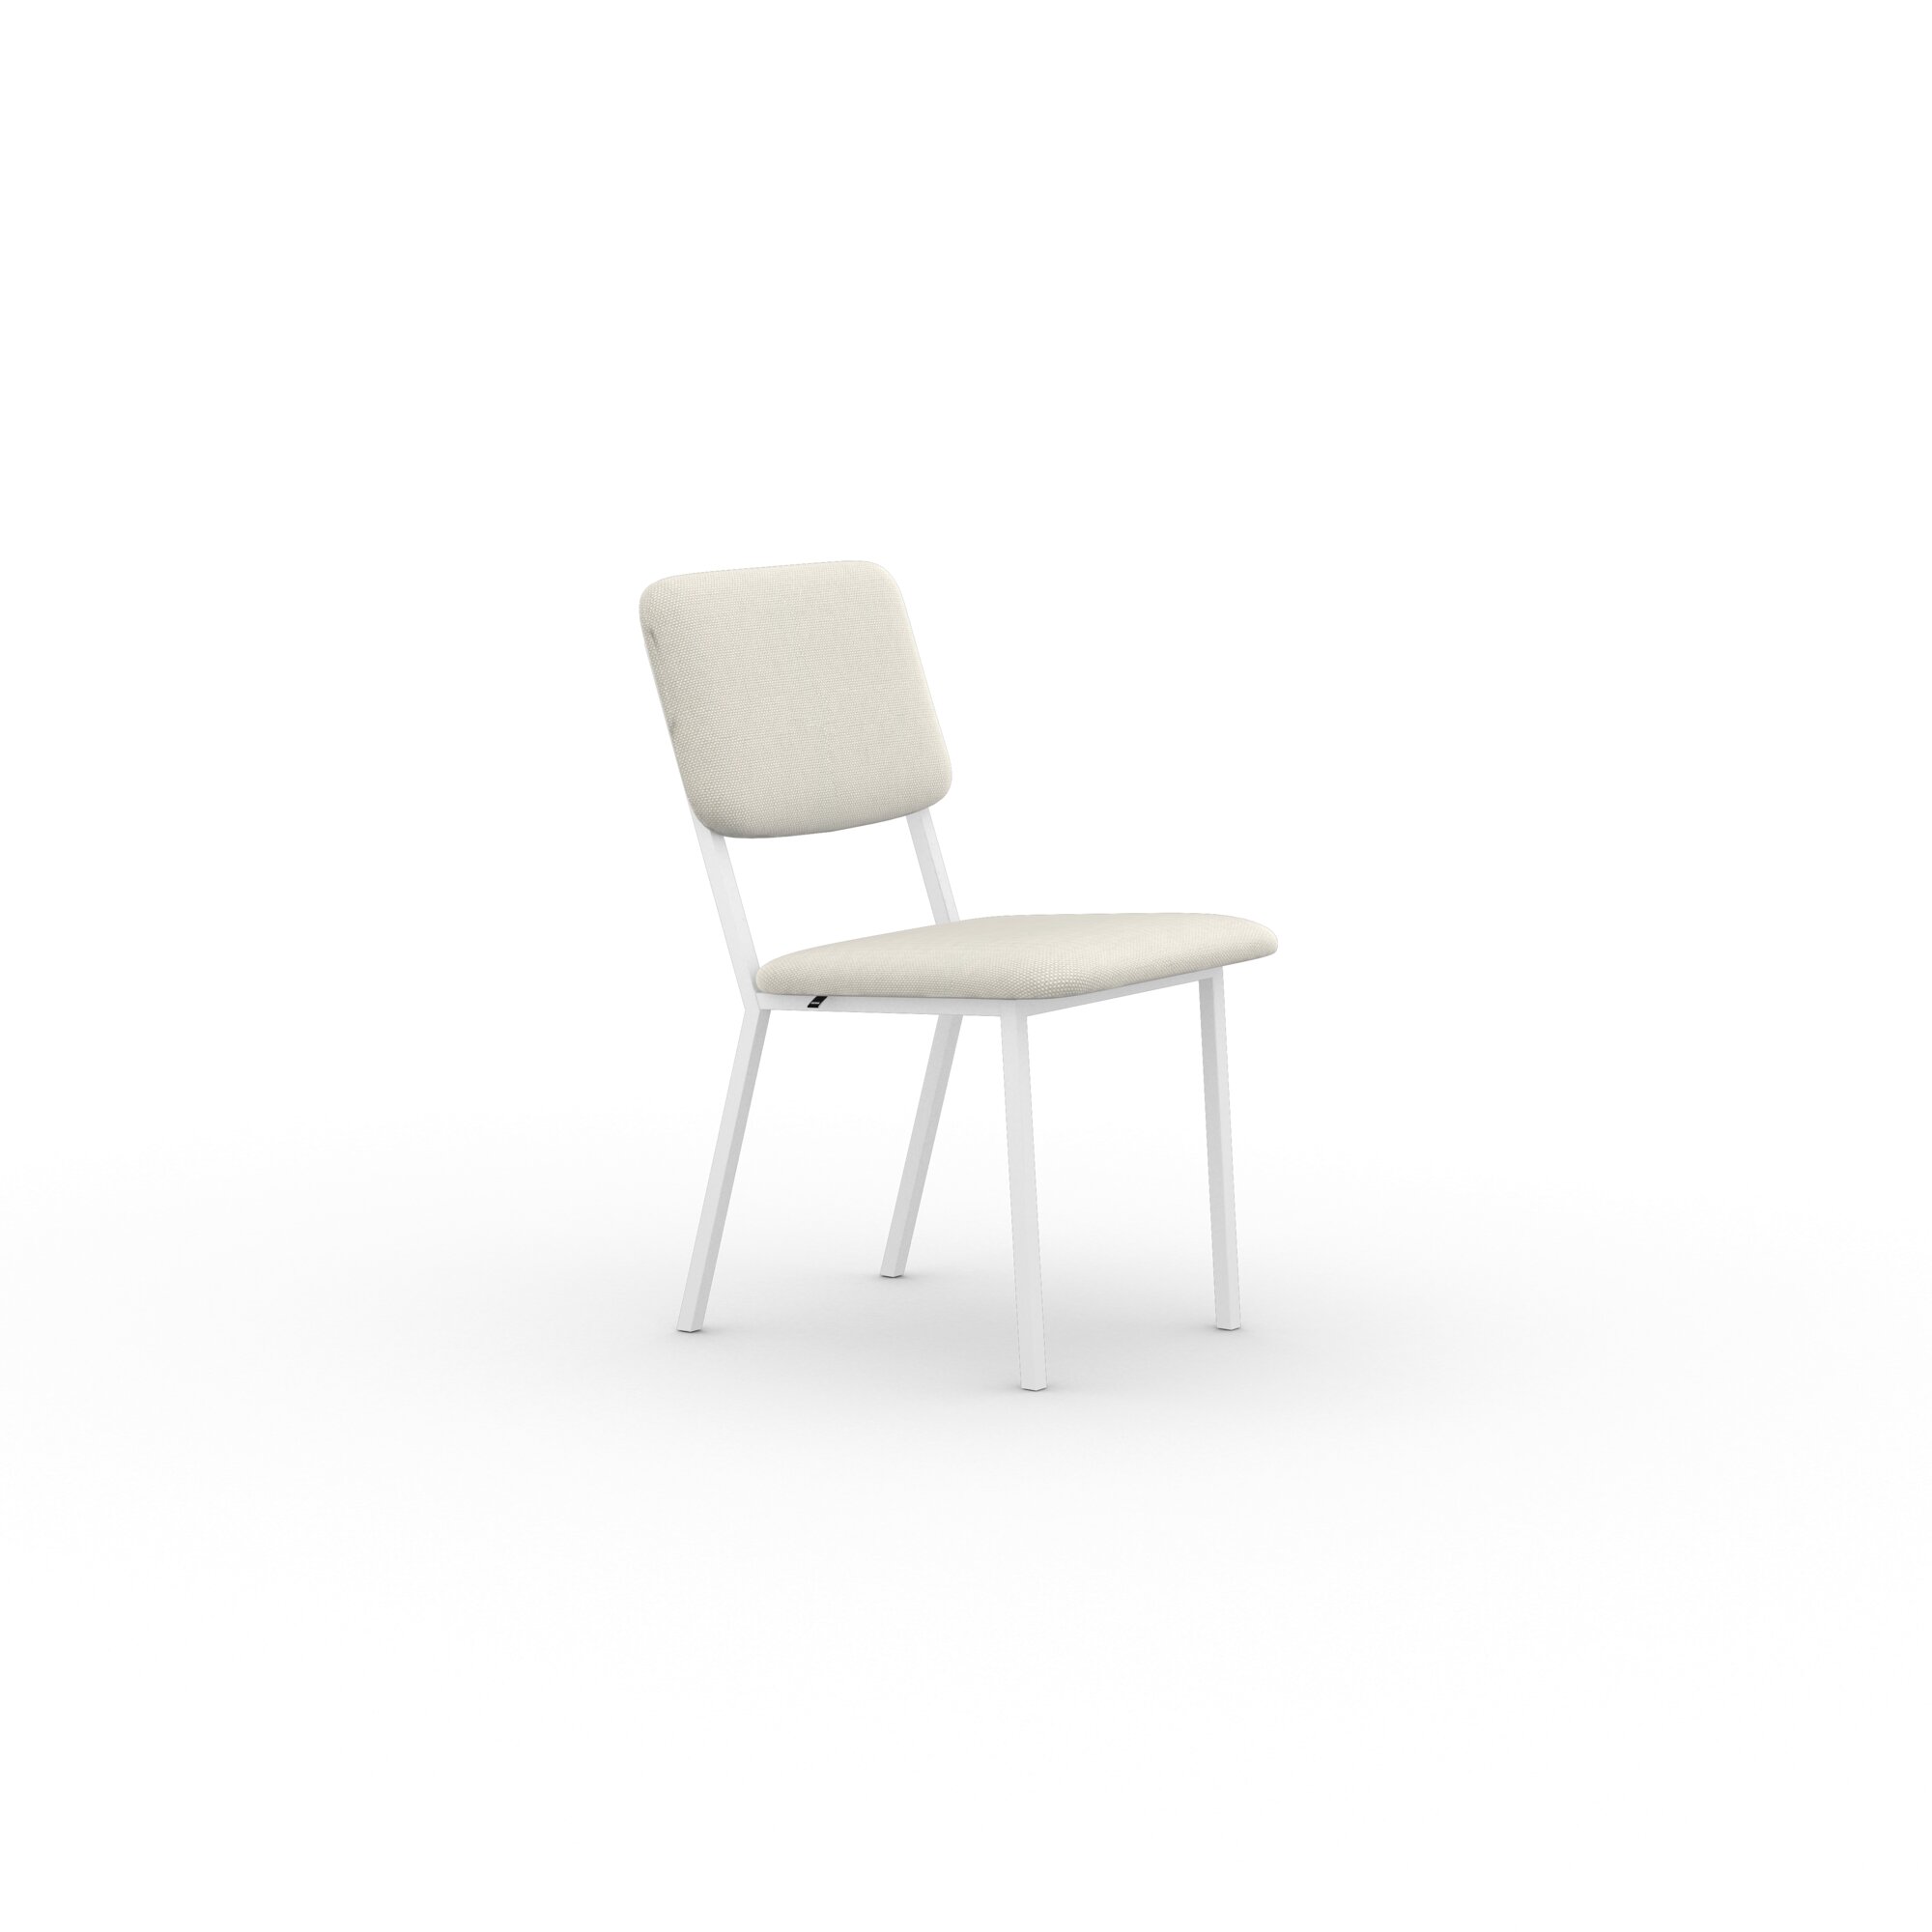 Design modern dining chair | Co Chair without armrest  calvados multibeige9995 | Studio HENK| 